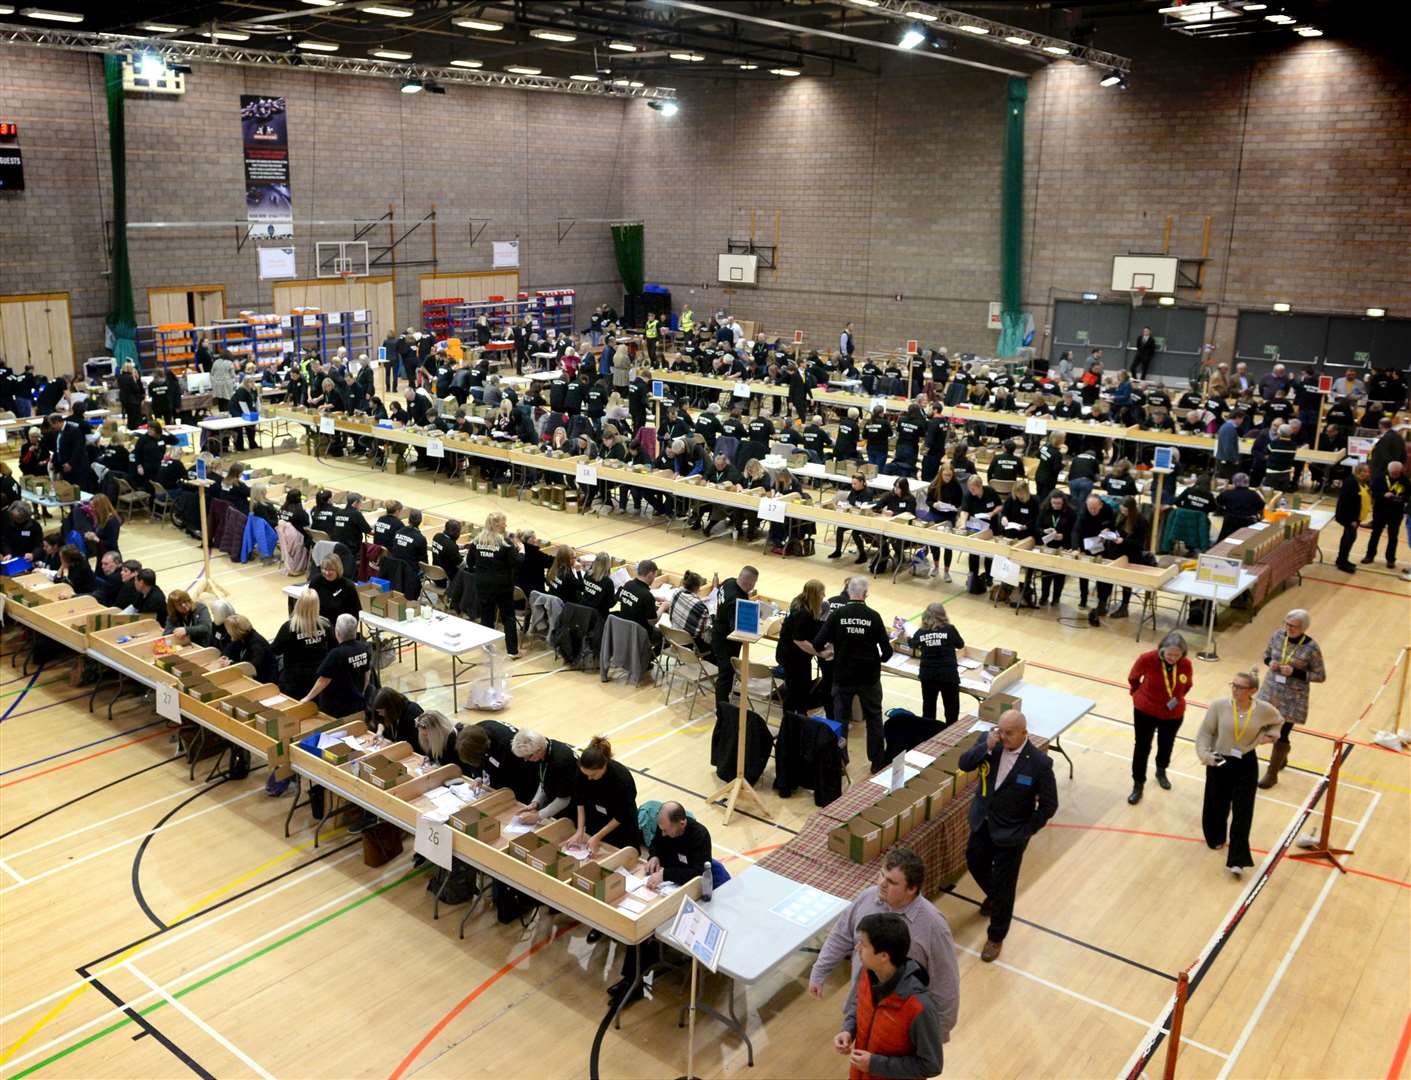 The scenes will be very different this time out to the General Election count at Inverness Leisure Centre in December 2019.